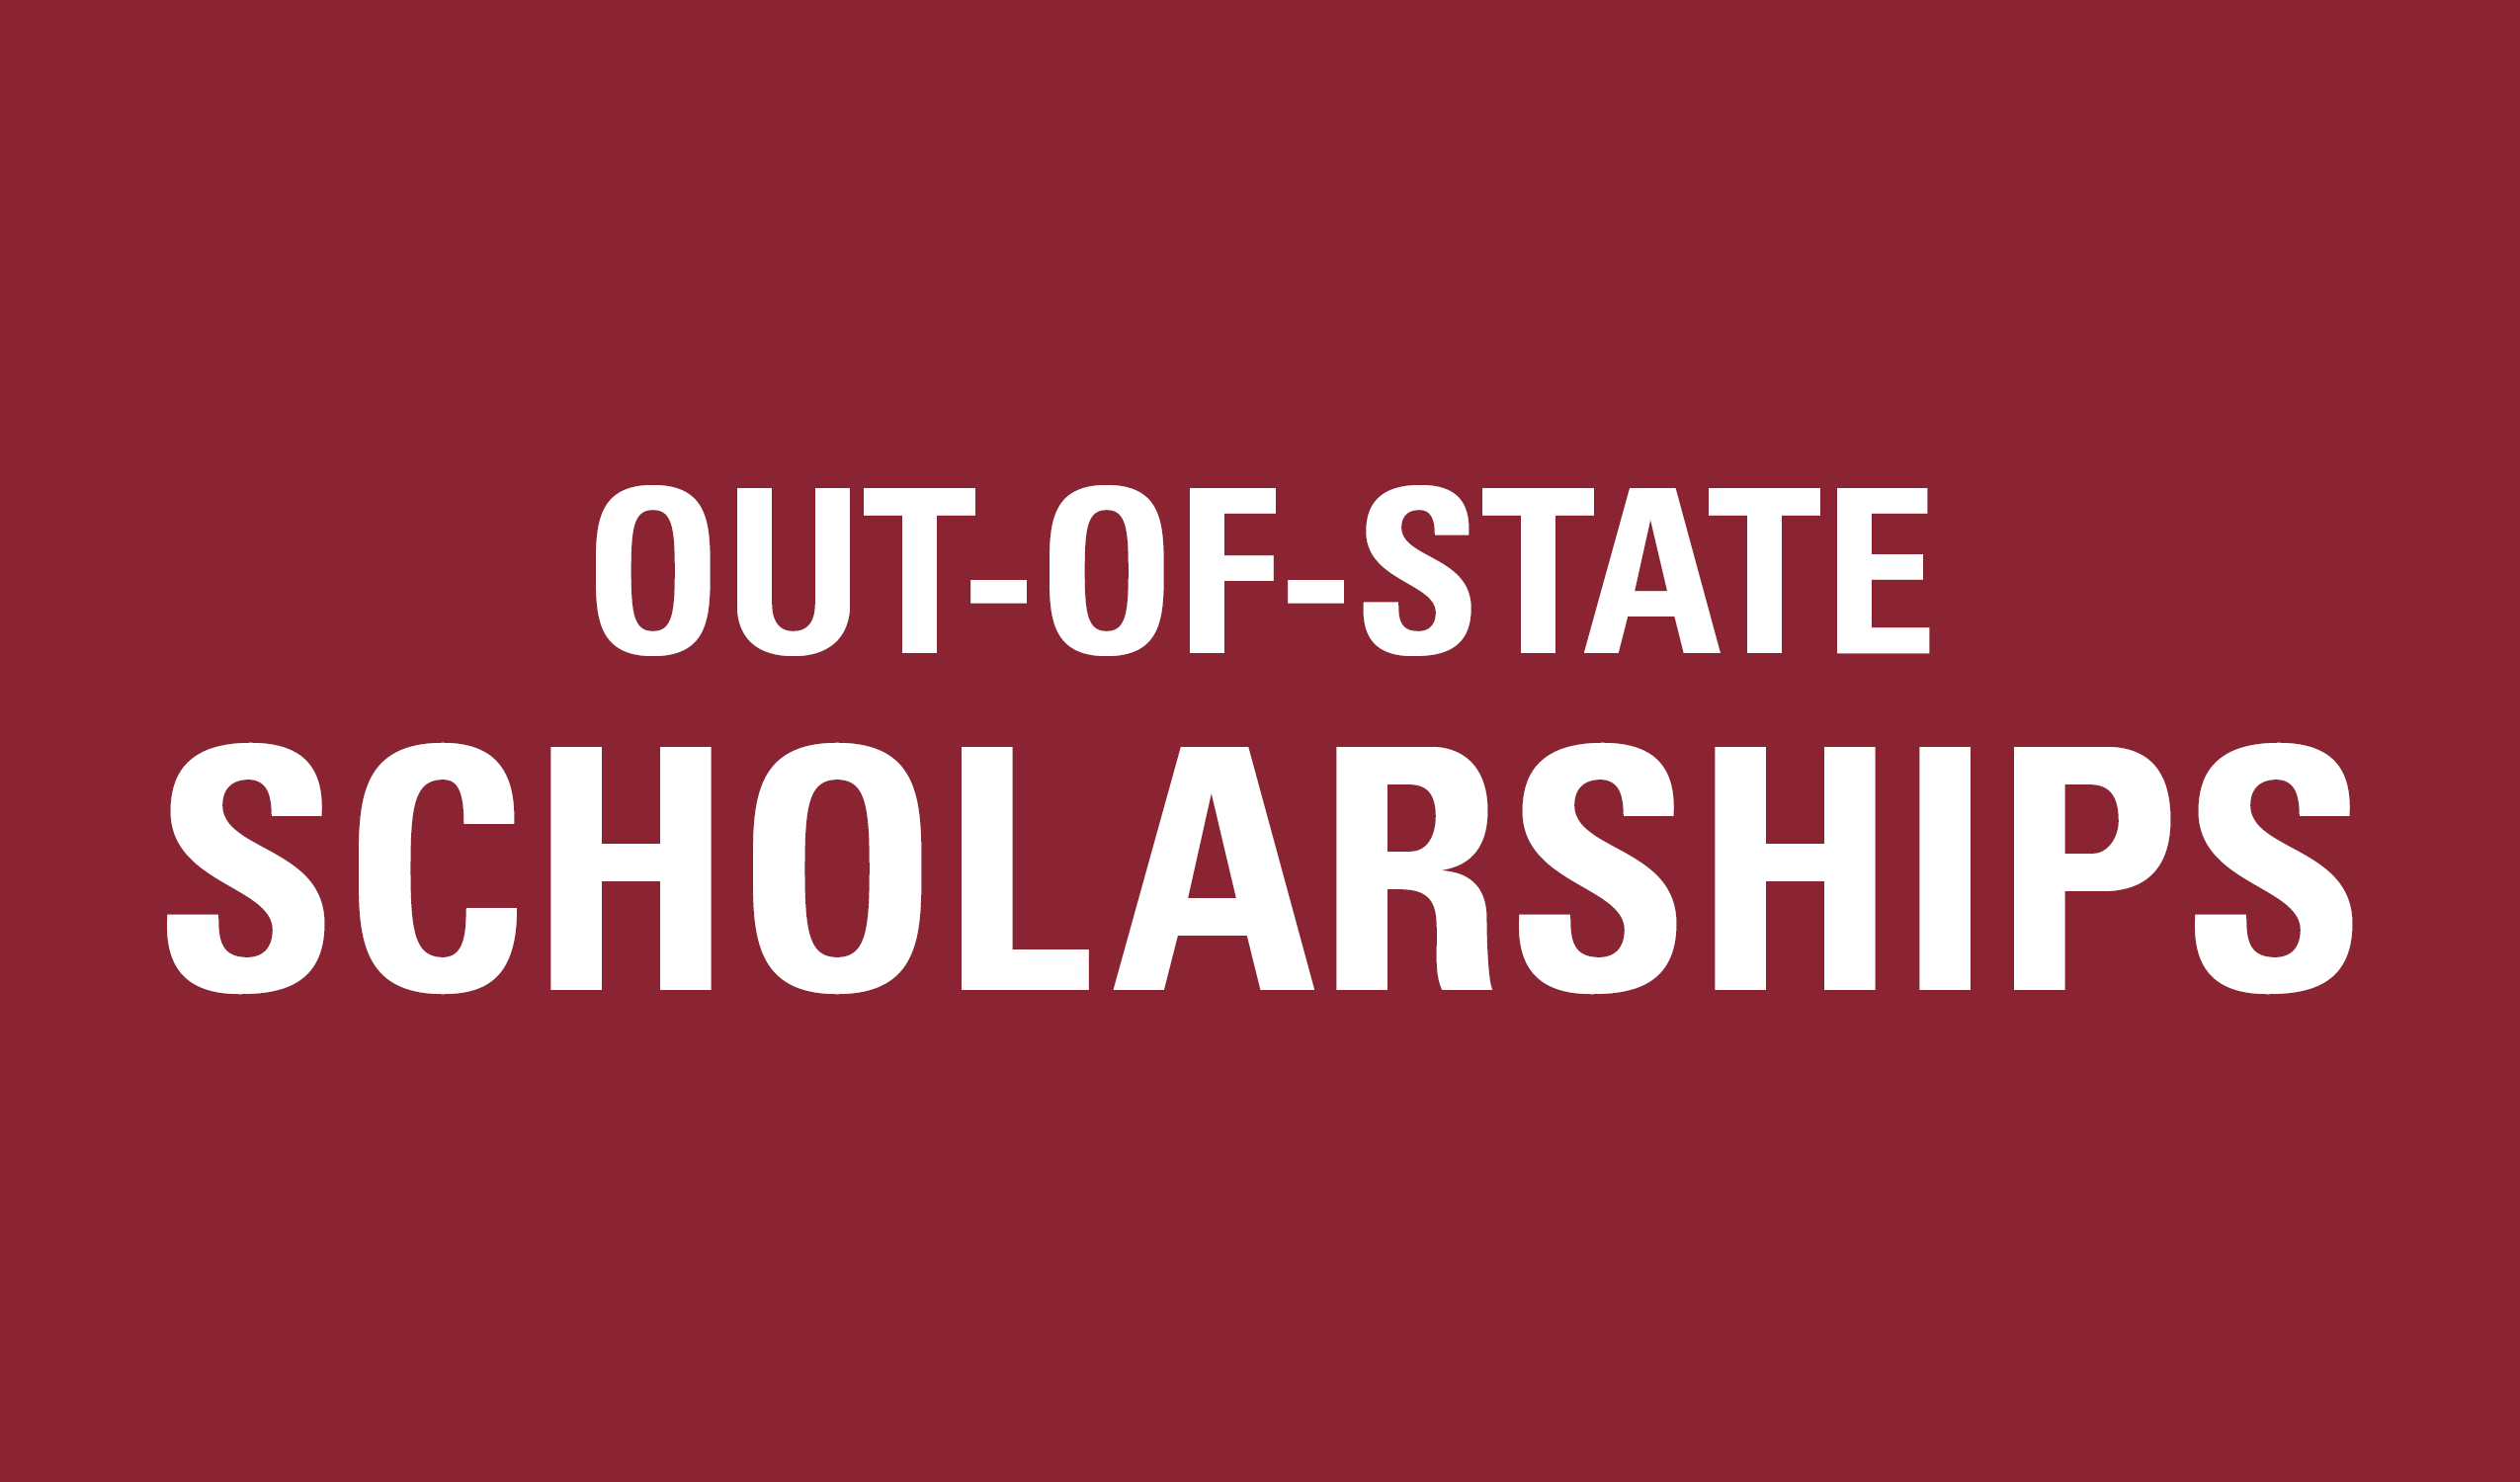 Out-of-State Scholarships